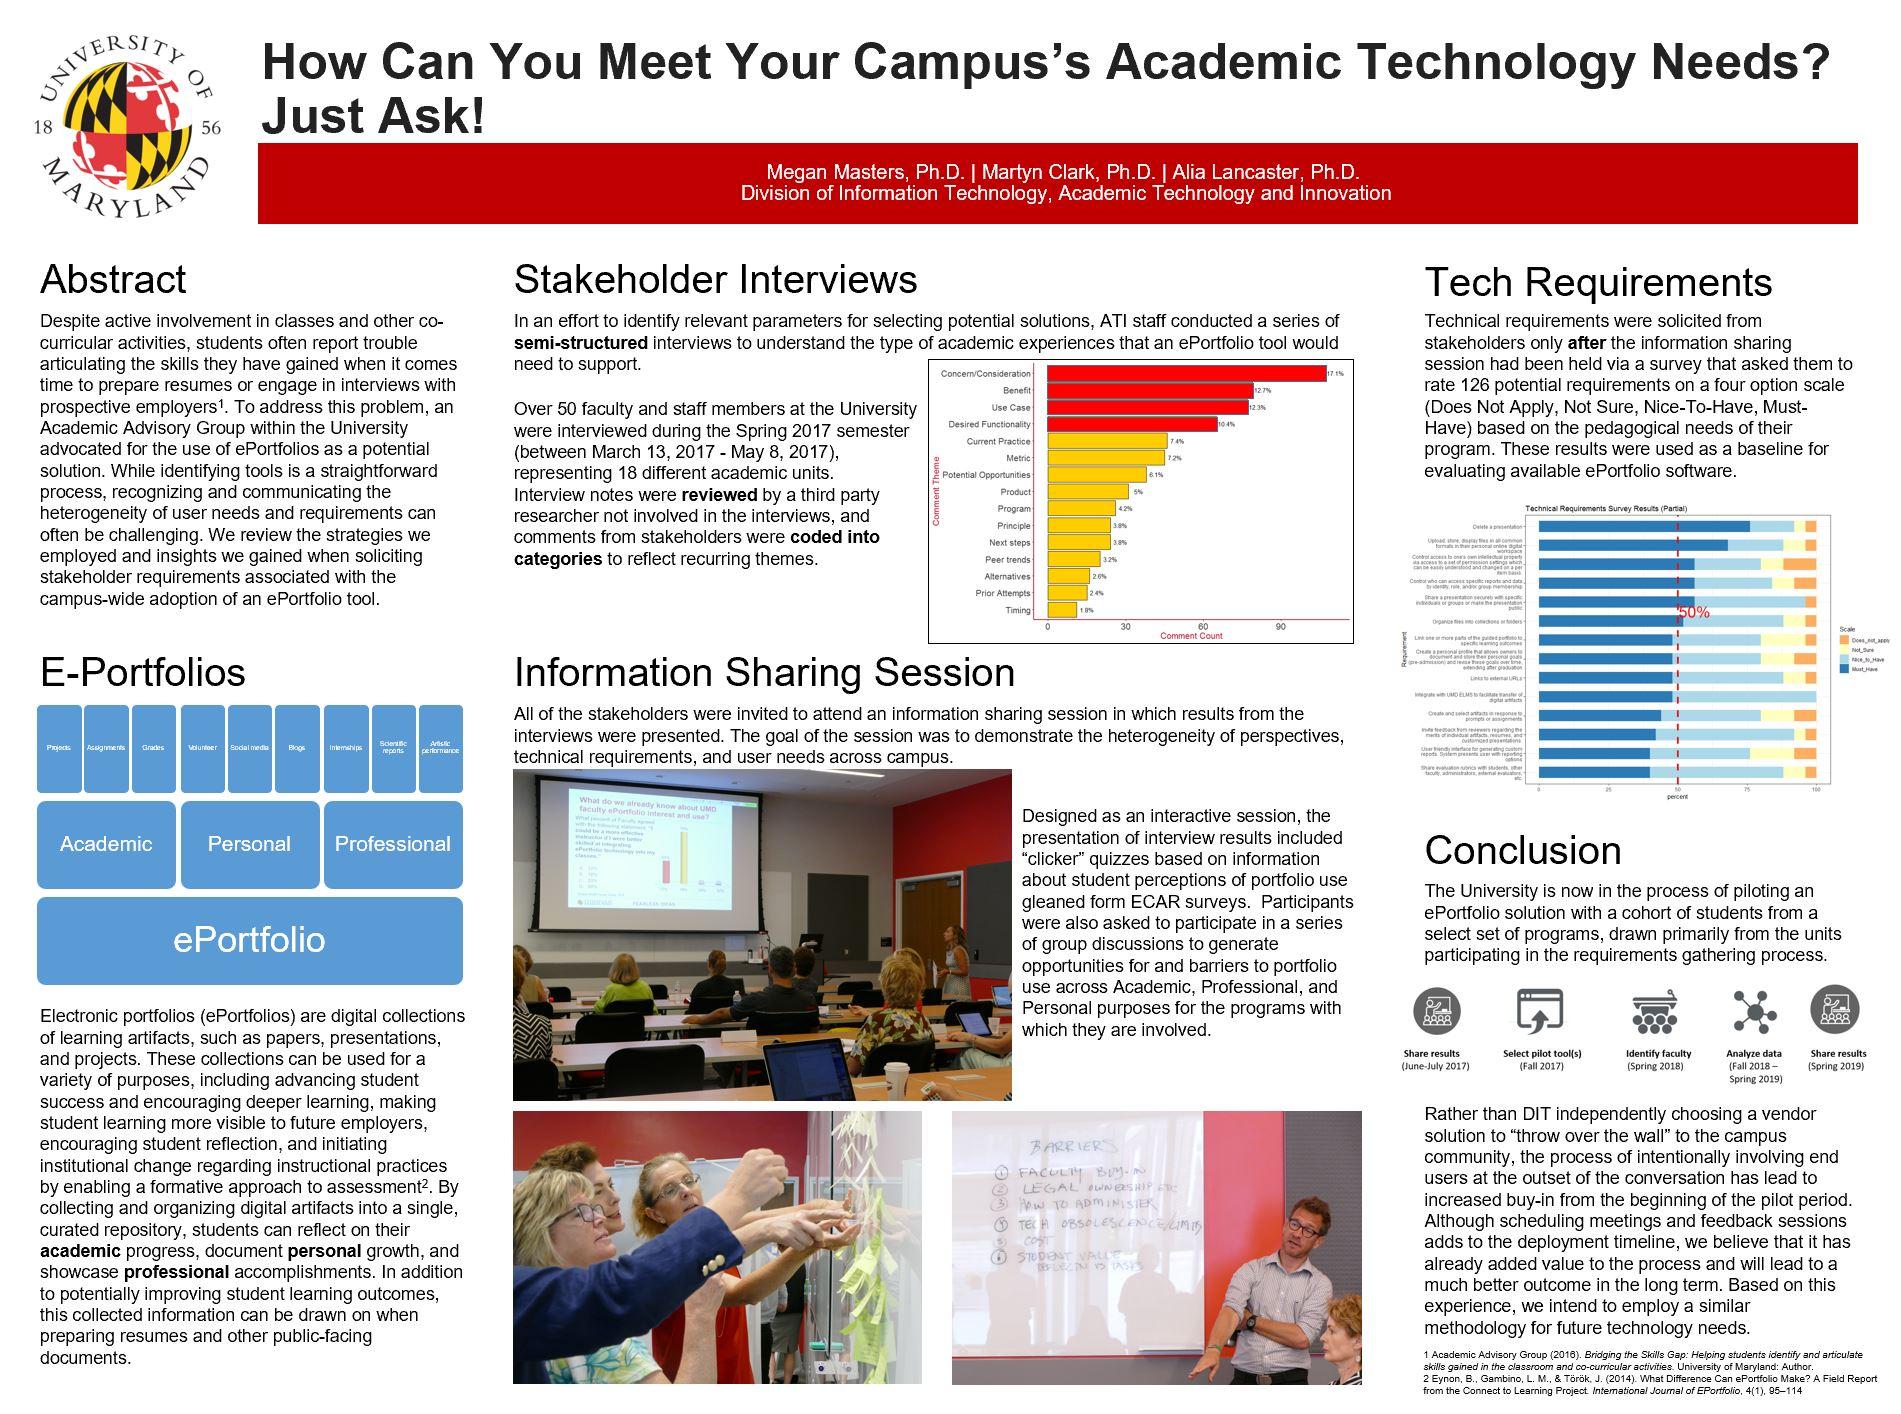 Conference poster entitled how can you meet your campus's academic technology need? Just ask!